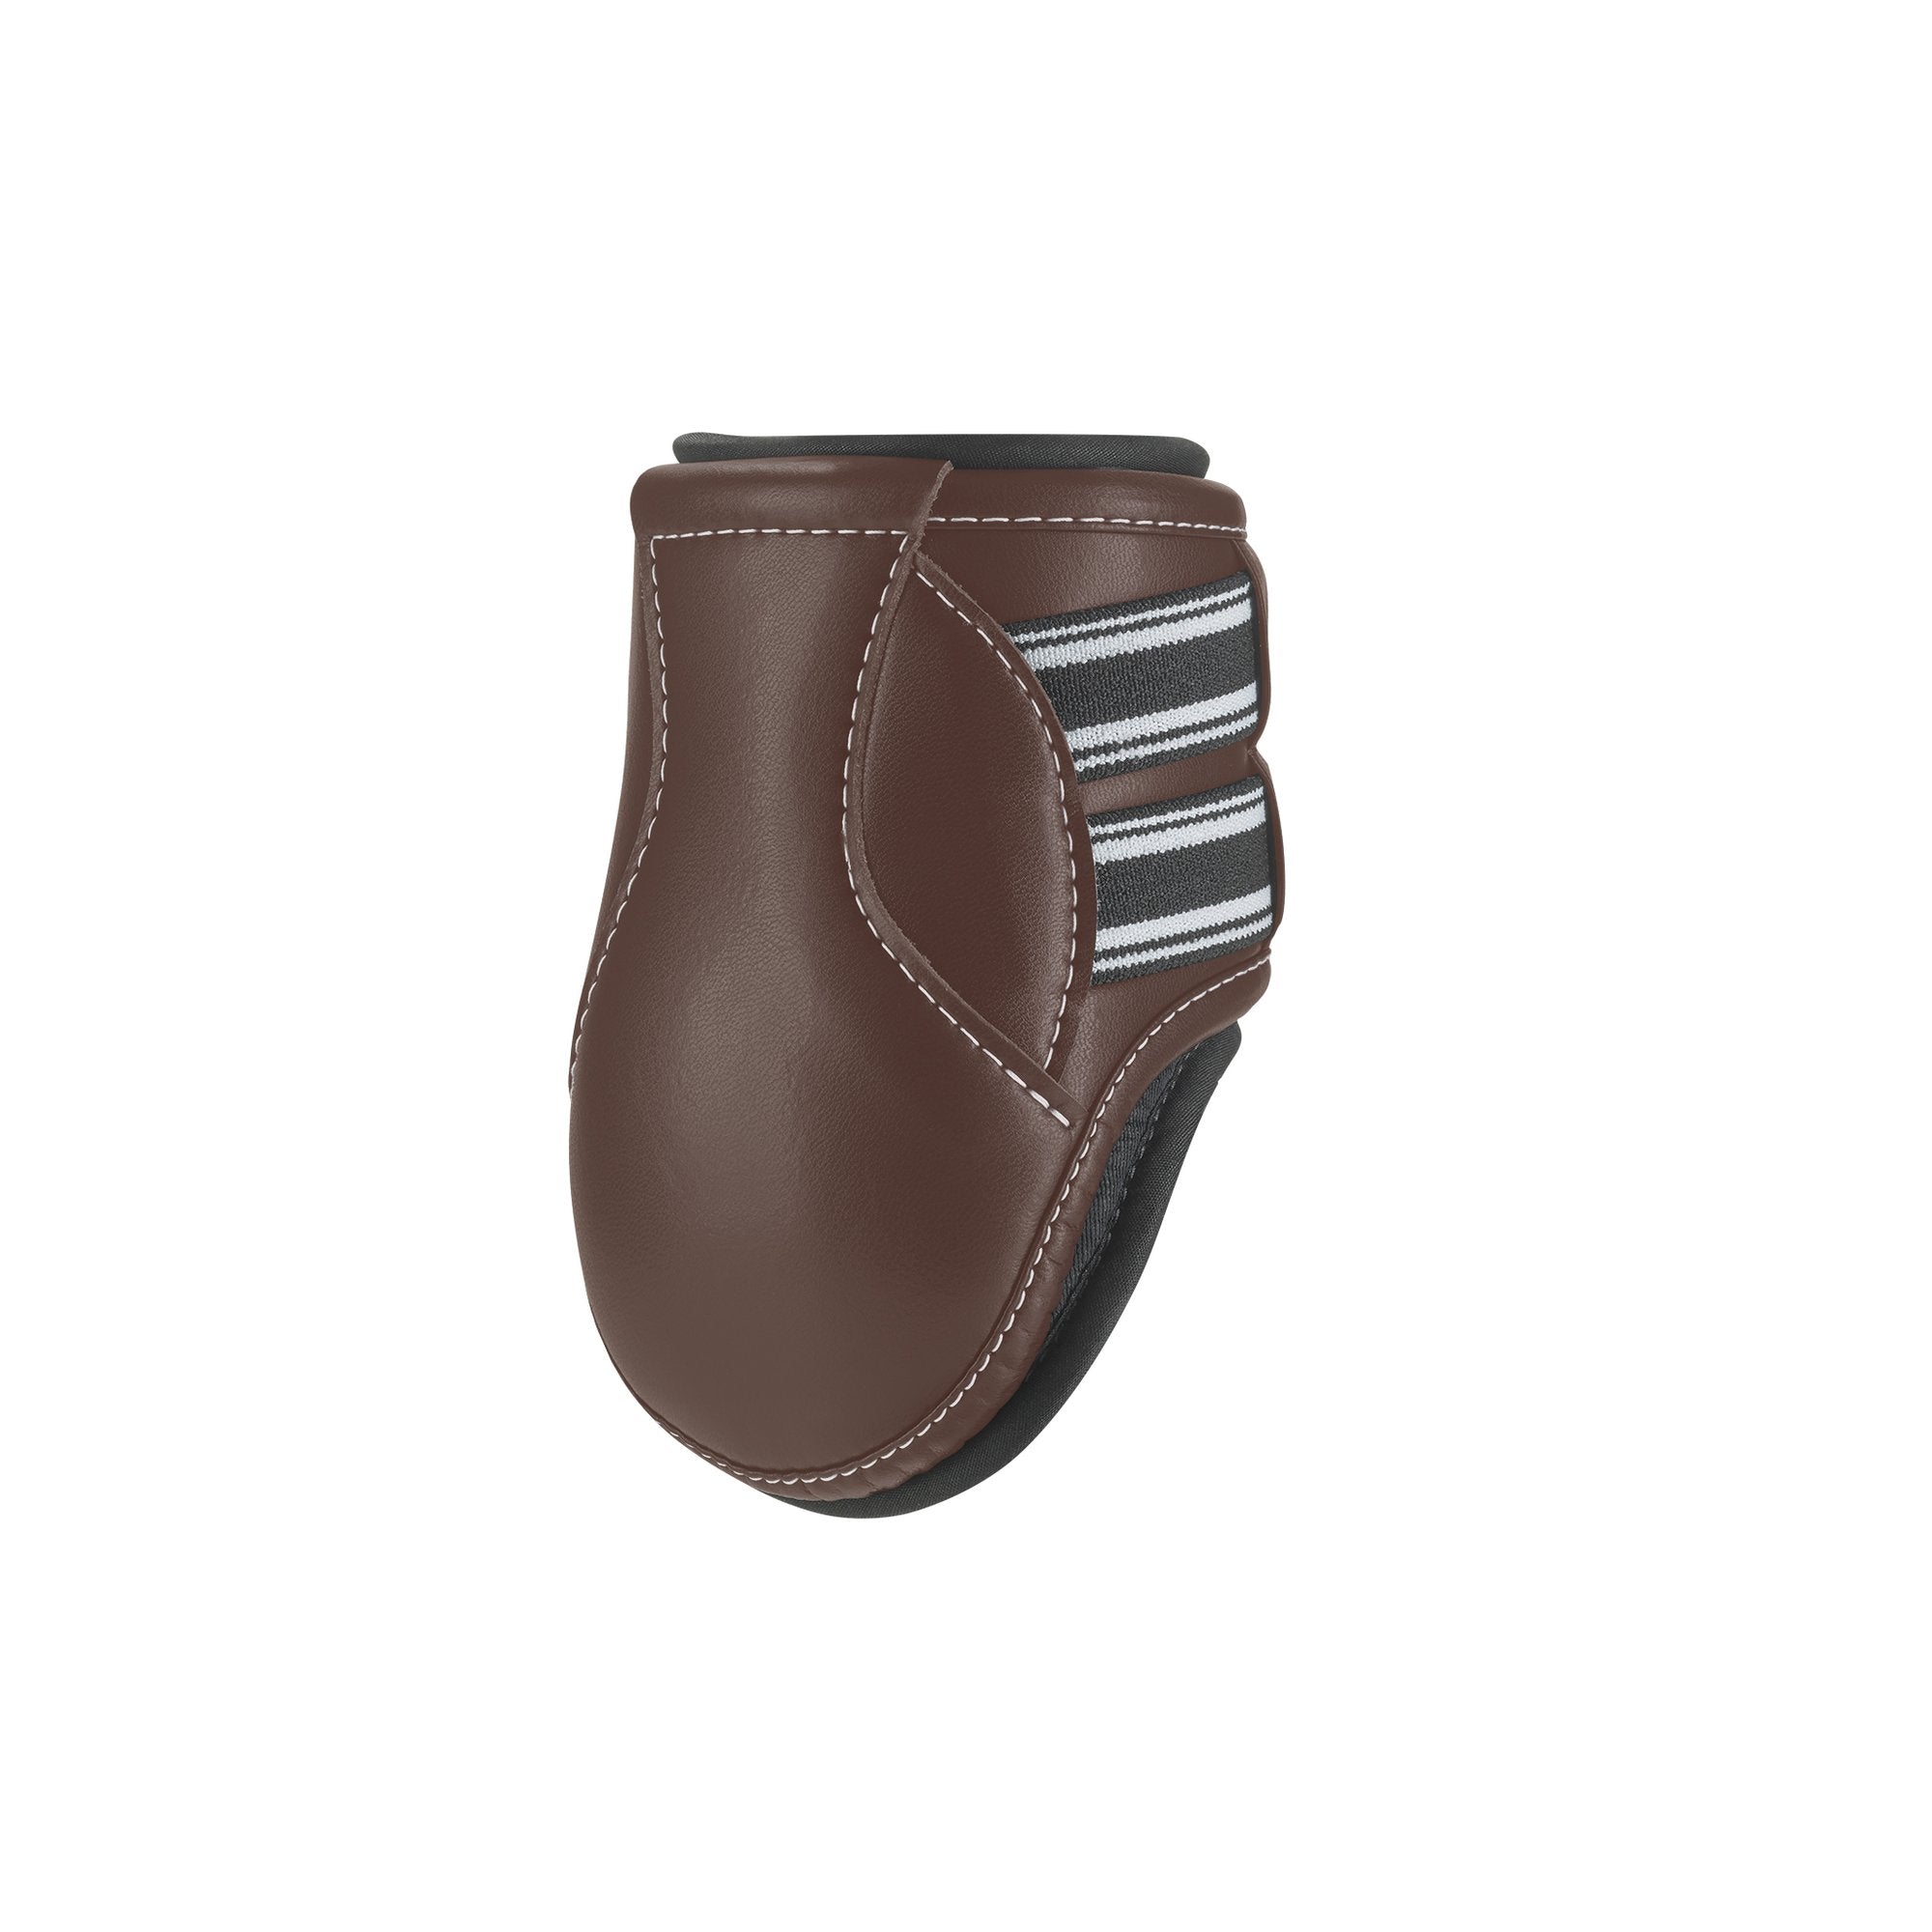 EquiFit D-Teq™ Hind Boot with ImpacTeq™ Liner